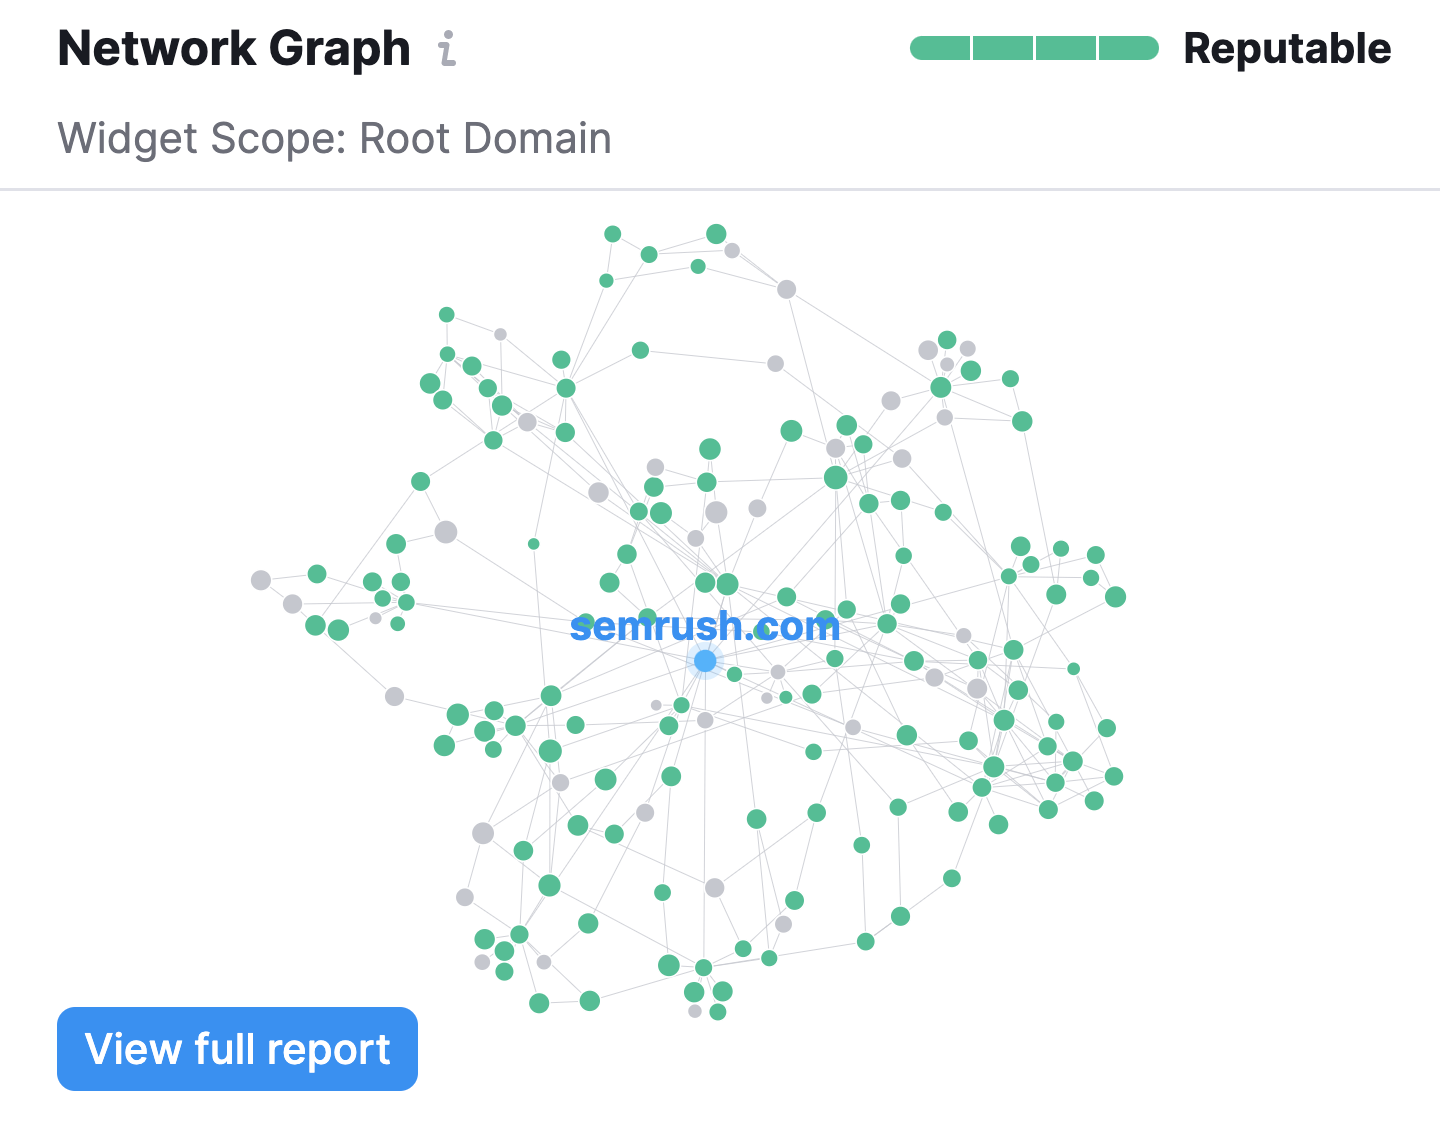 An example of the Network Graph for semrush.com in Backlink Analytics.